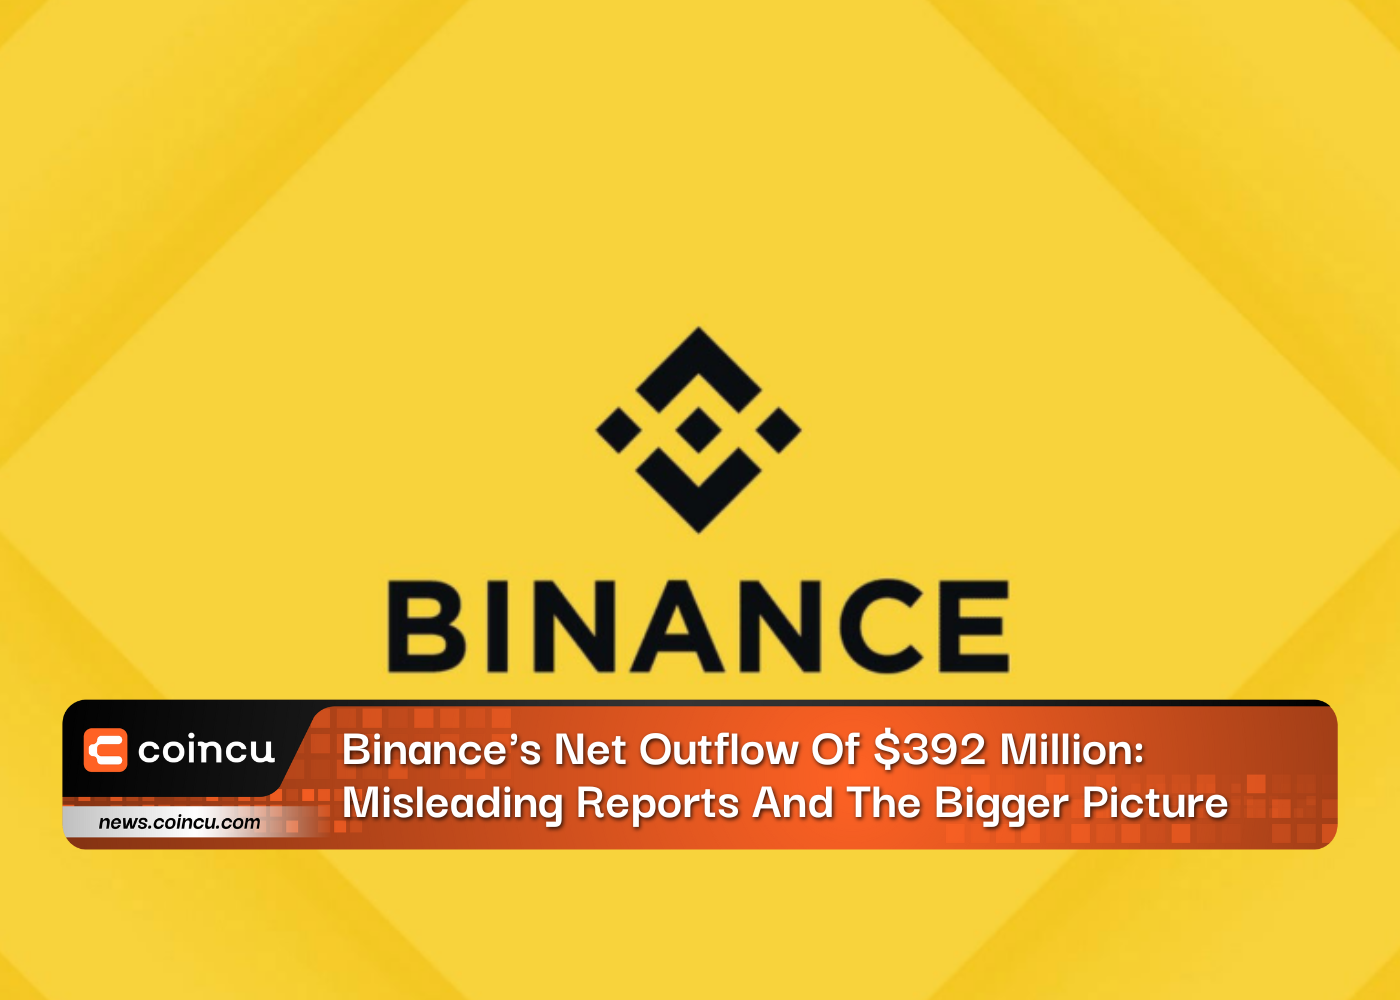 Binance's Net Outflow Of $392 Million: Misleading Reports And The Bigger Picture